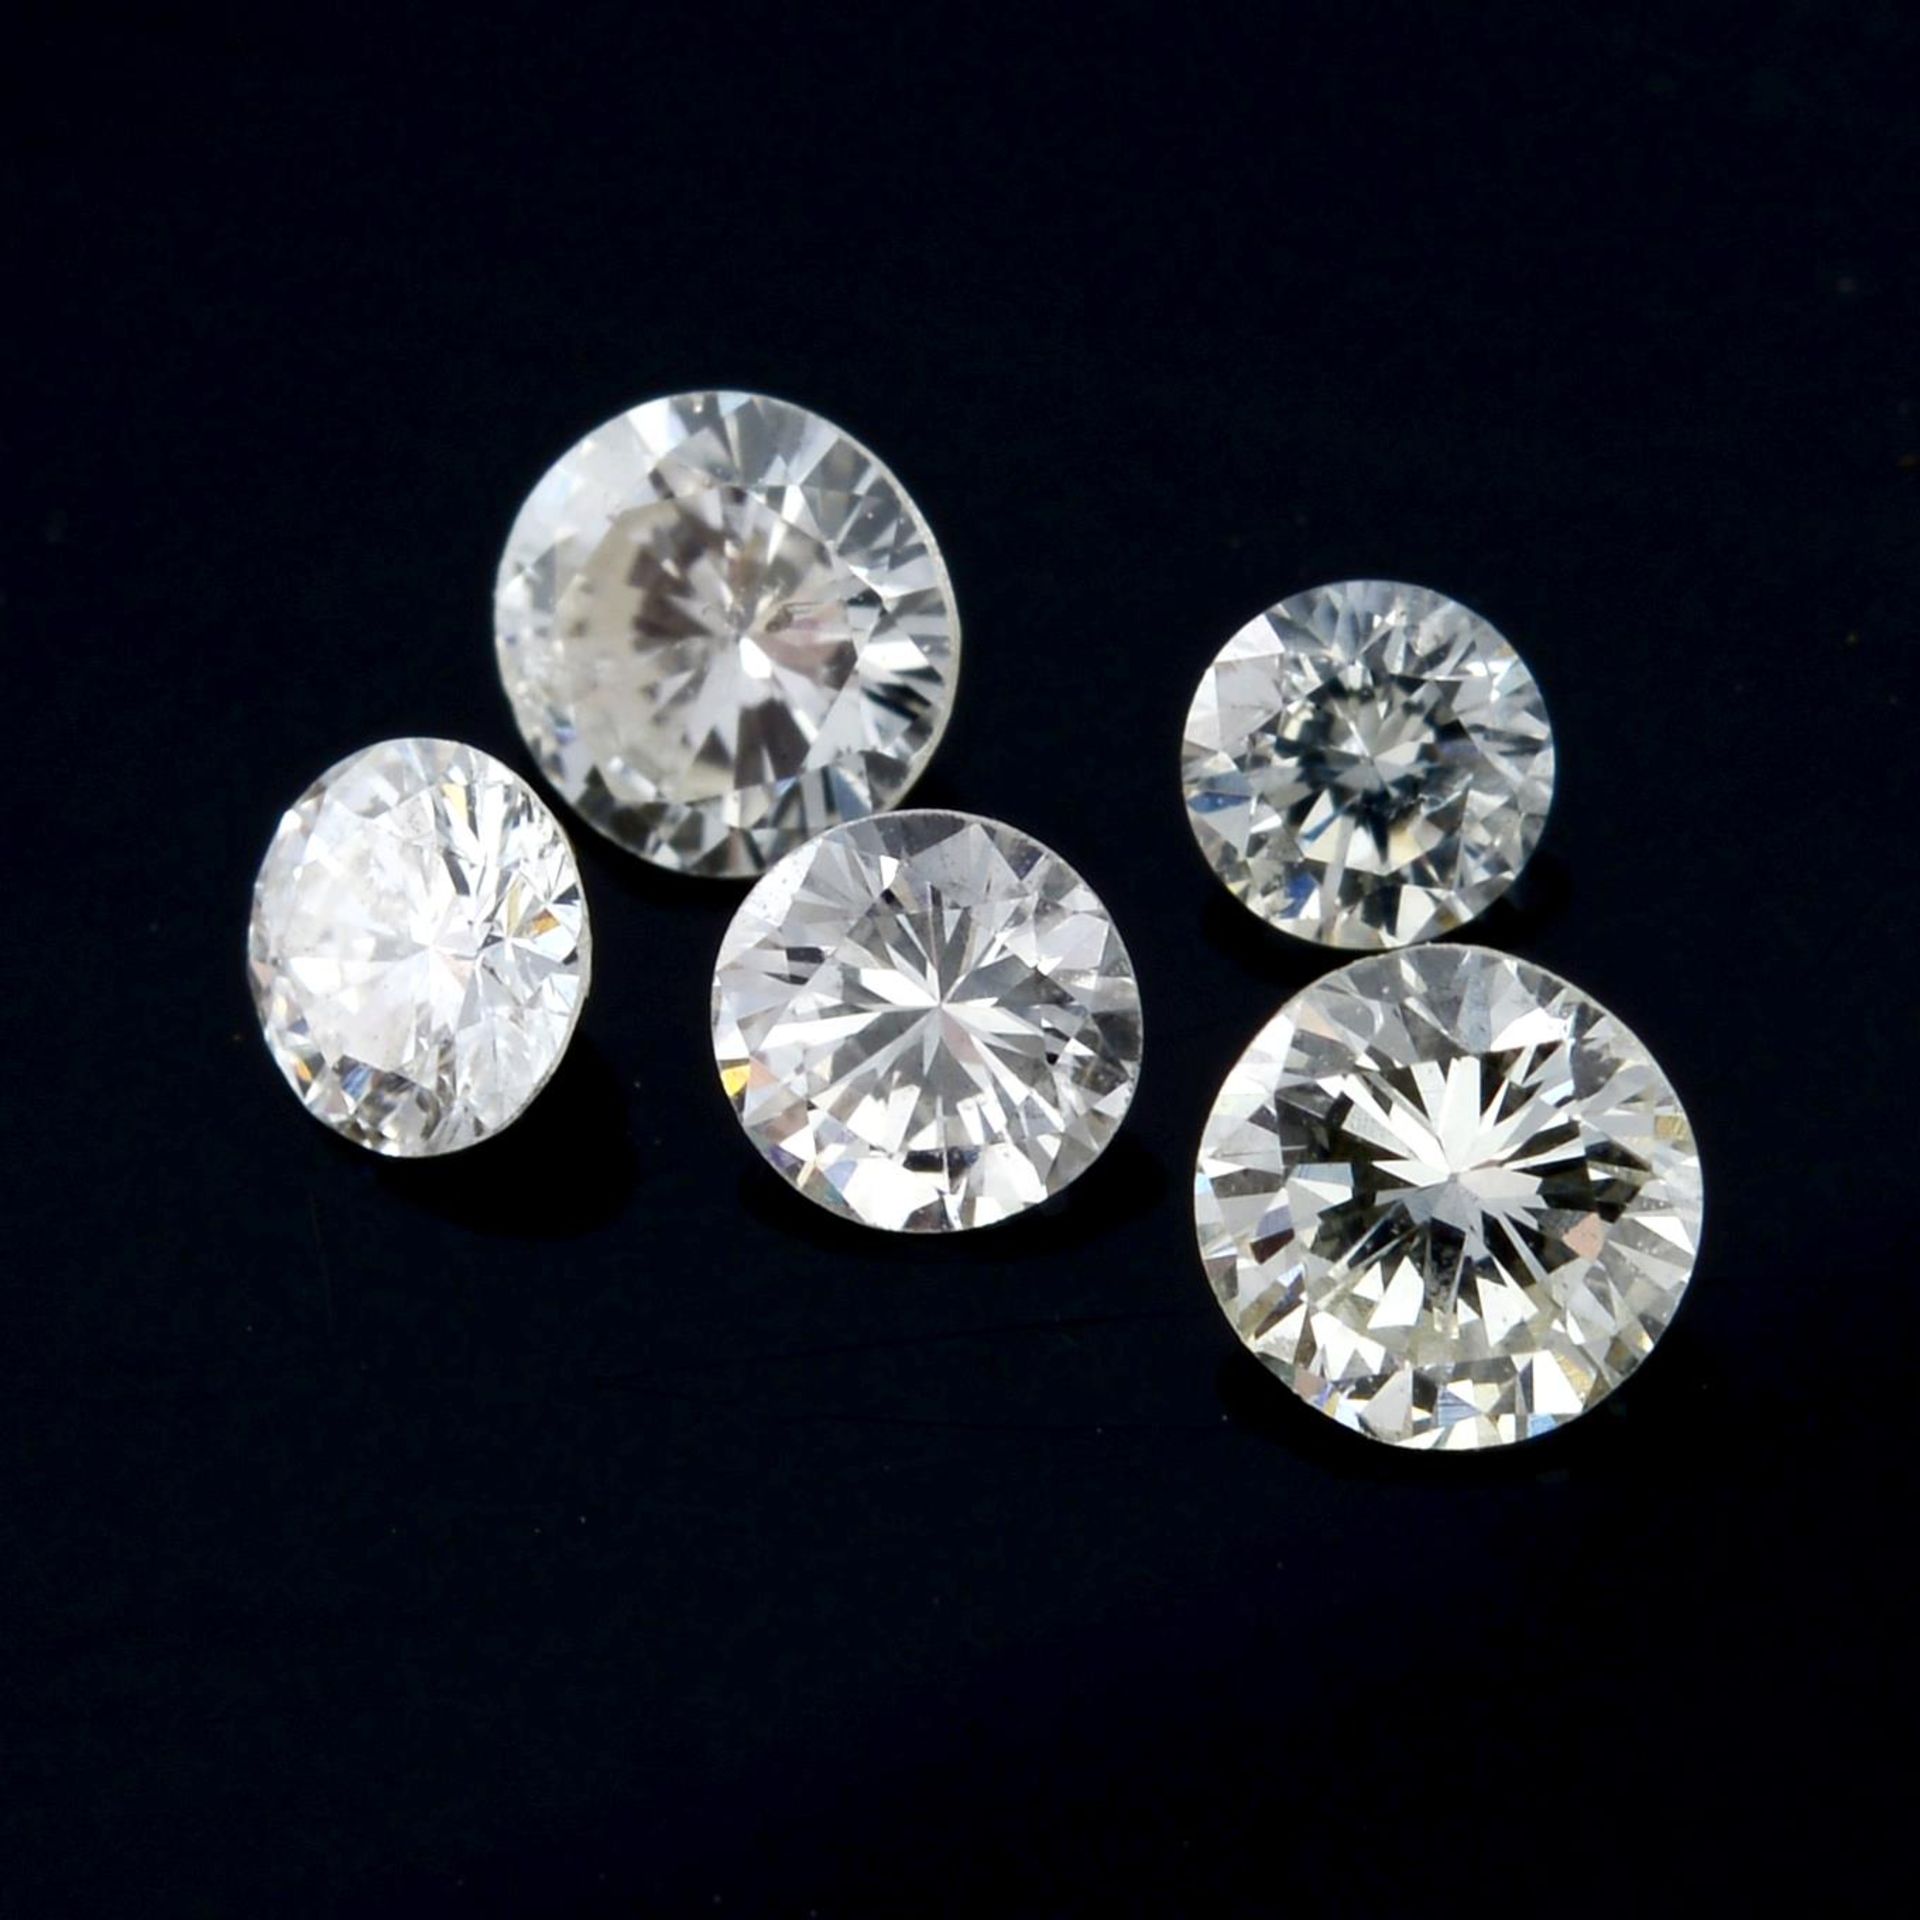 A selection of brilliant-cut diamonds, weighing 1.06cts total.